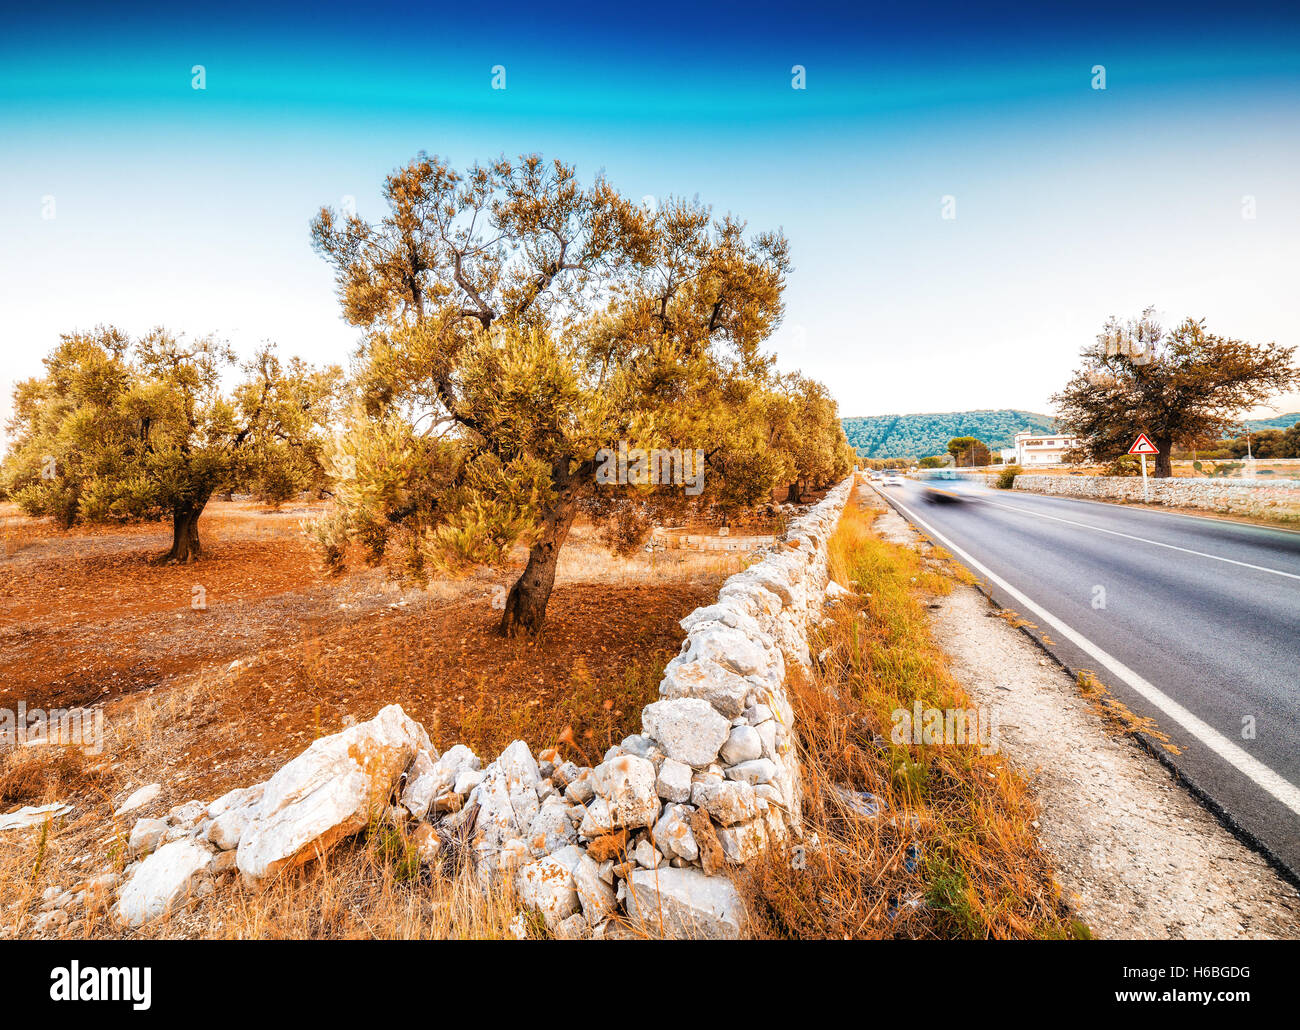 freeway along red soil of Apulian olive groves Stock Photo